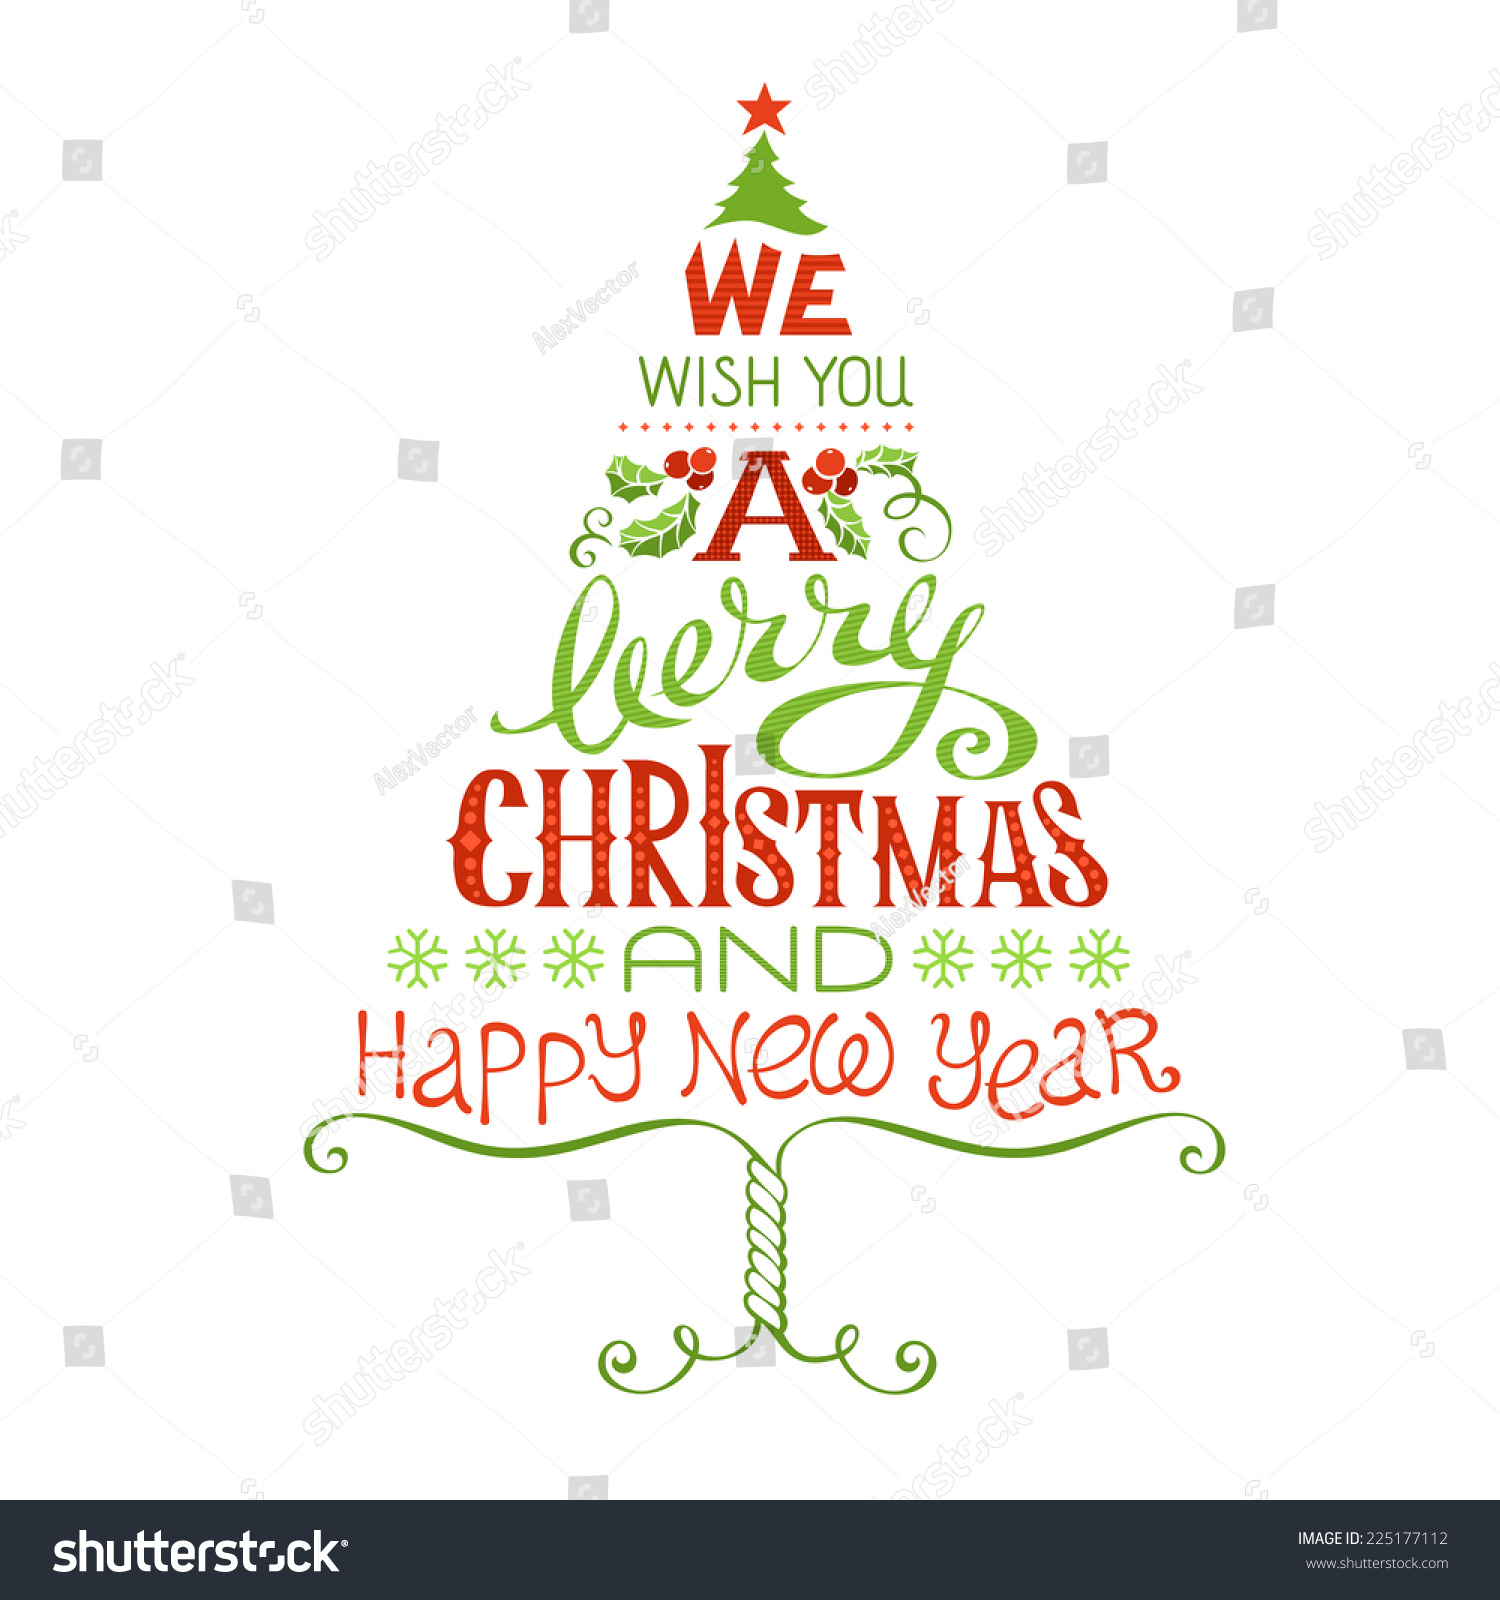 christmas clip art for email signature - photo #33